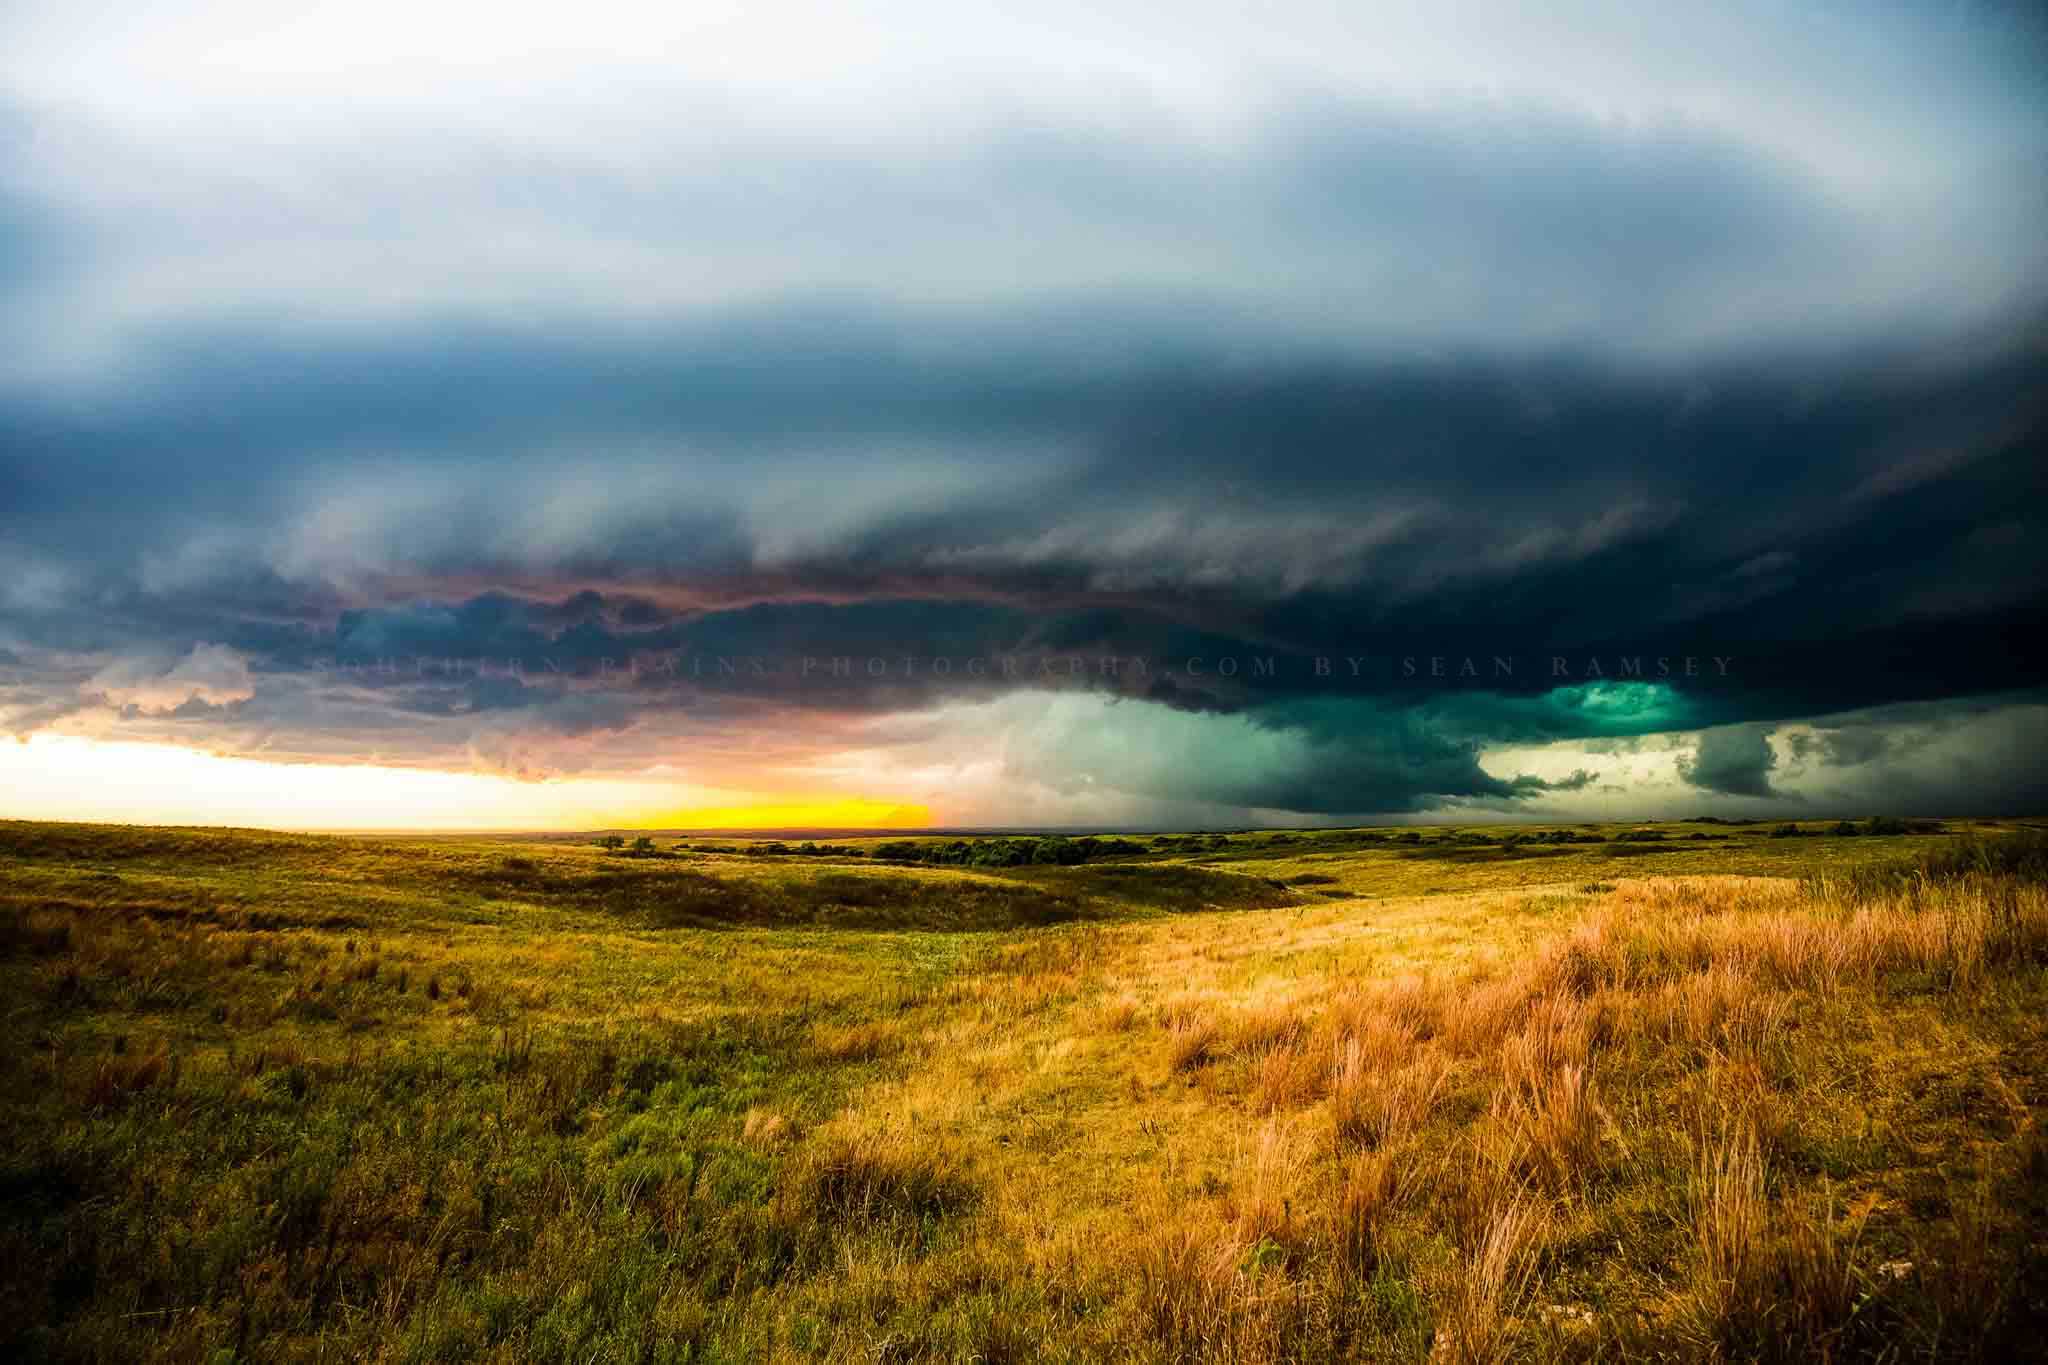 Storm photography print of a supercell thunderstorm over the open prairie at sunset on an autumn evening in Kansas by Sean Ramsey of Southern Plains Photography.